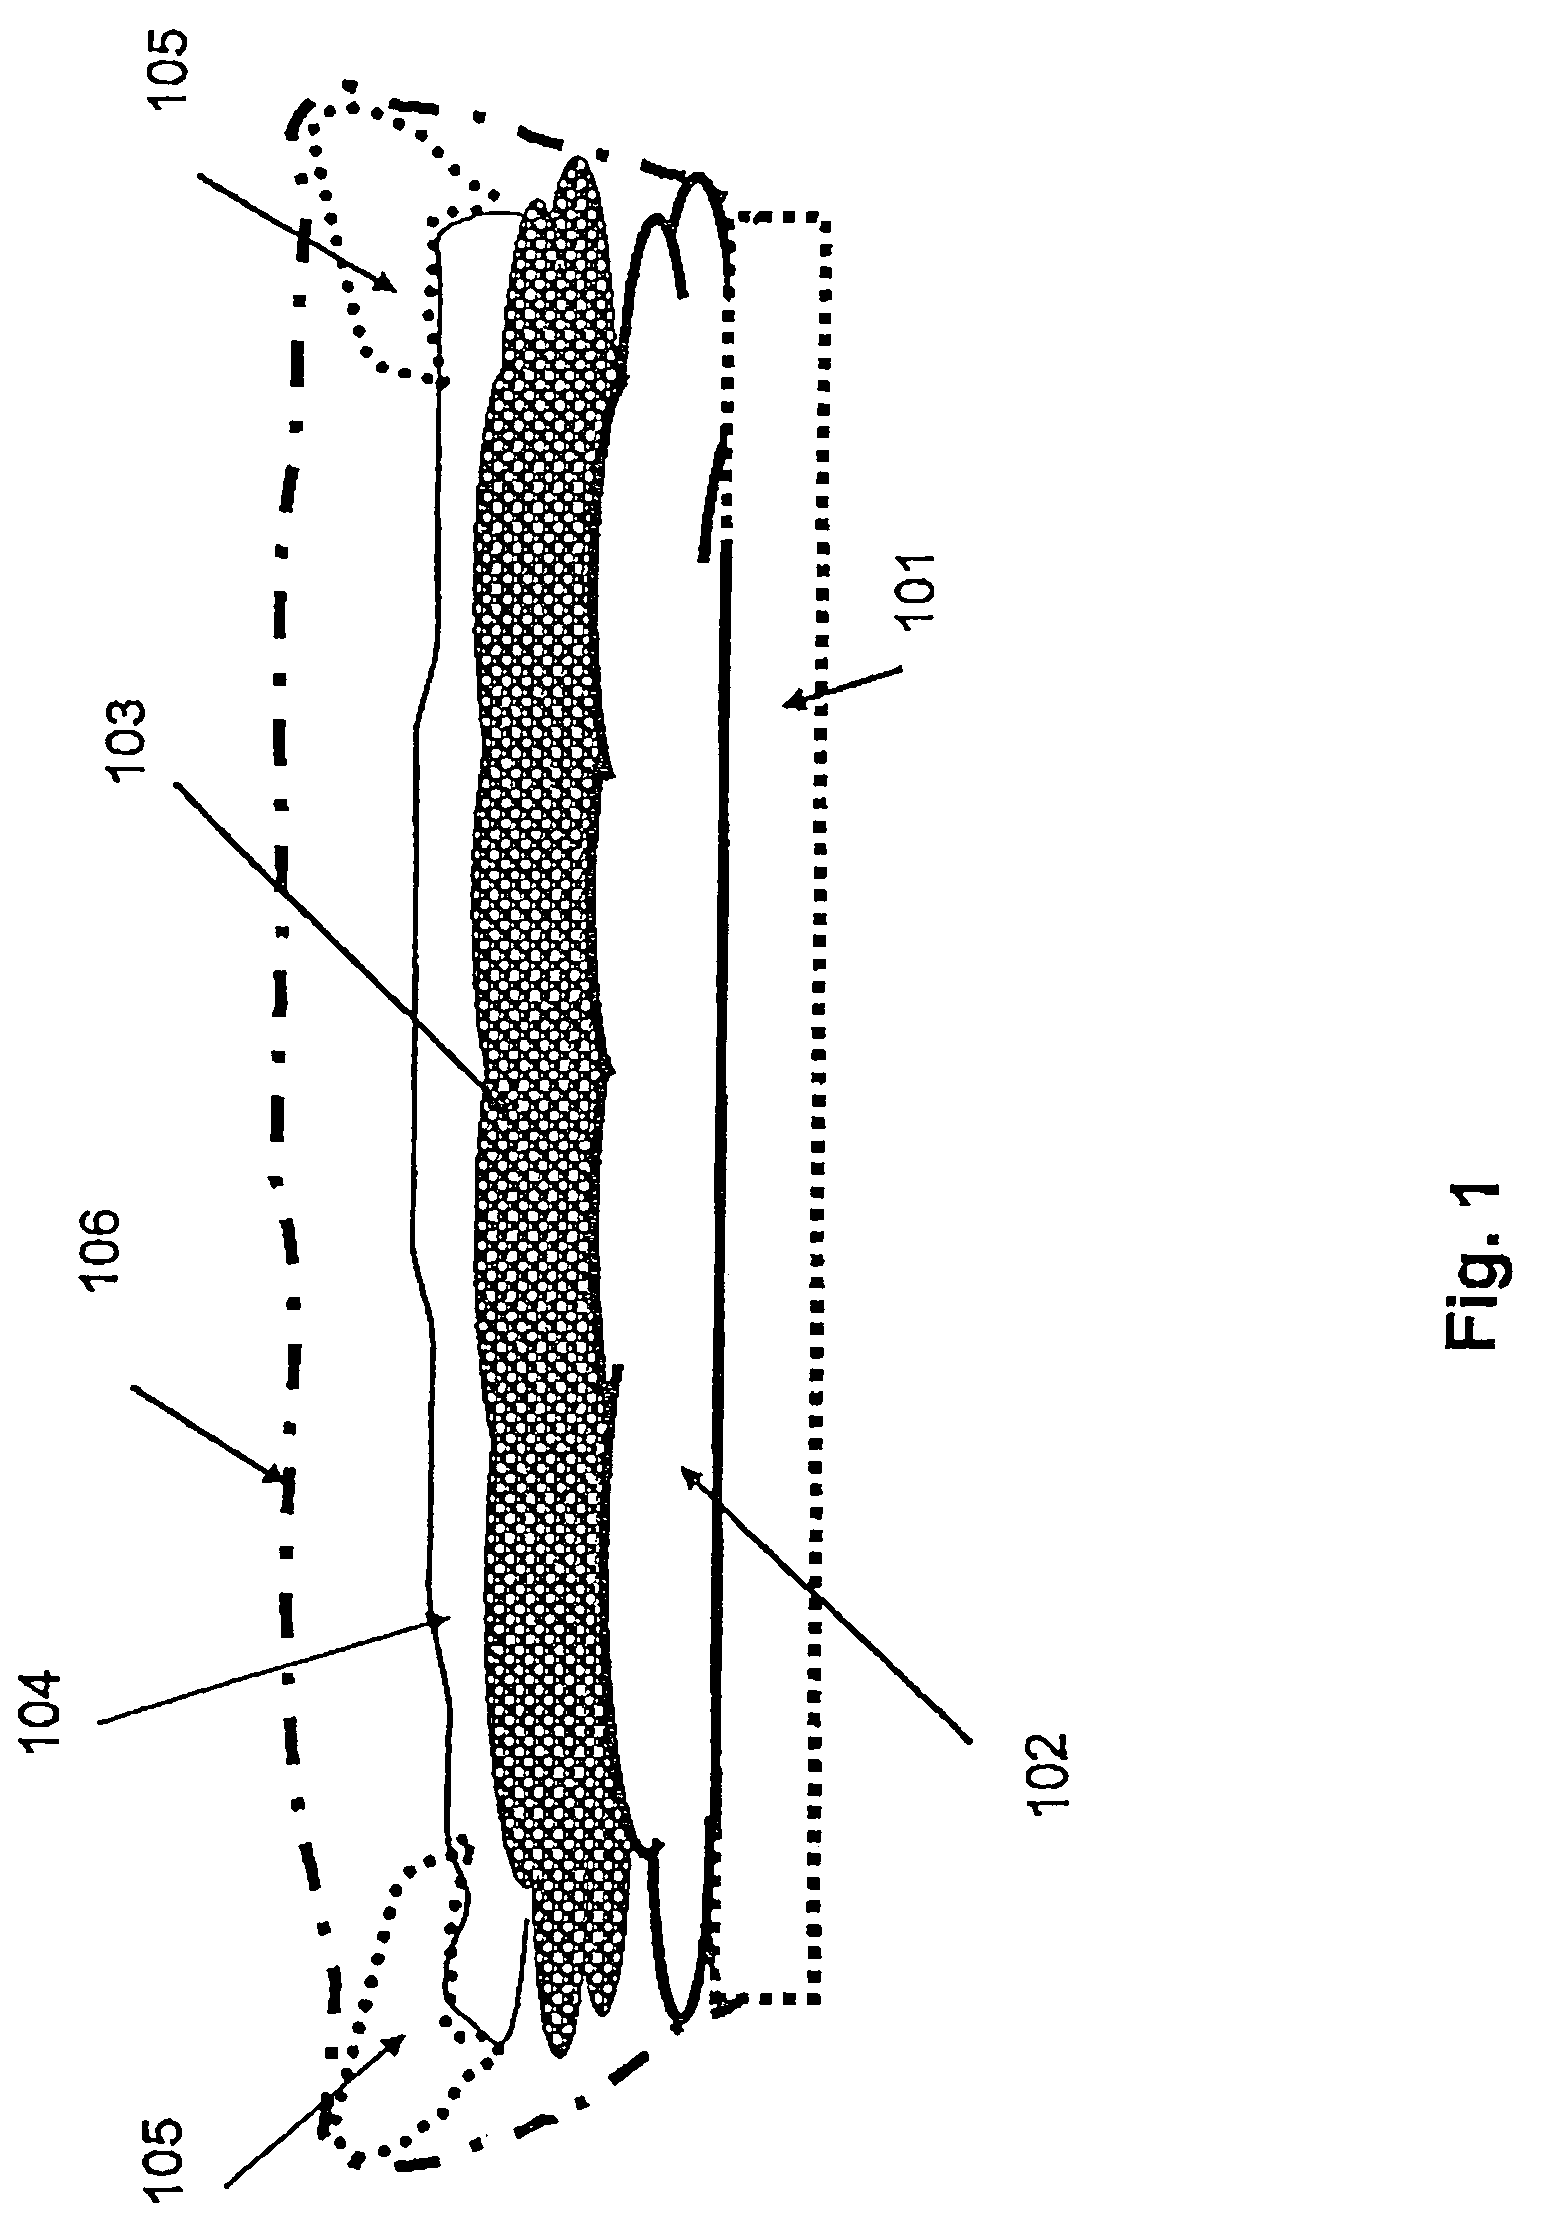 Device and method for carefully settling a patient in a defined position